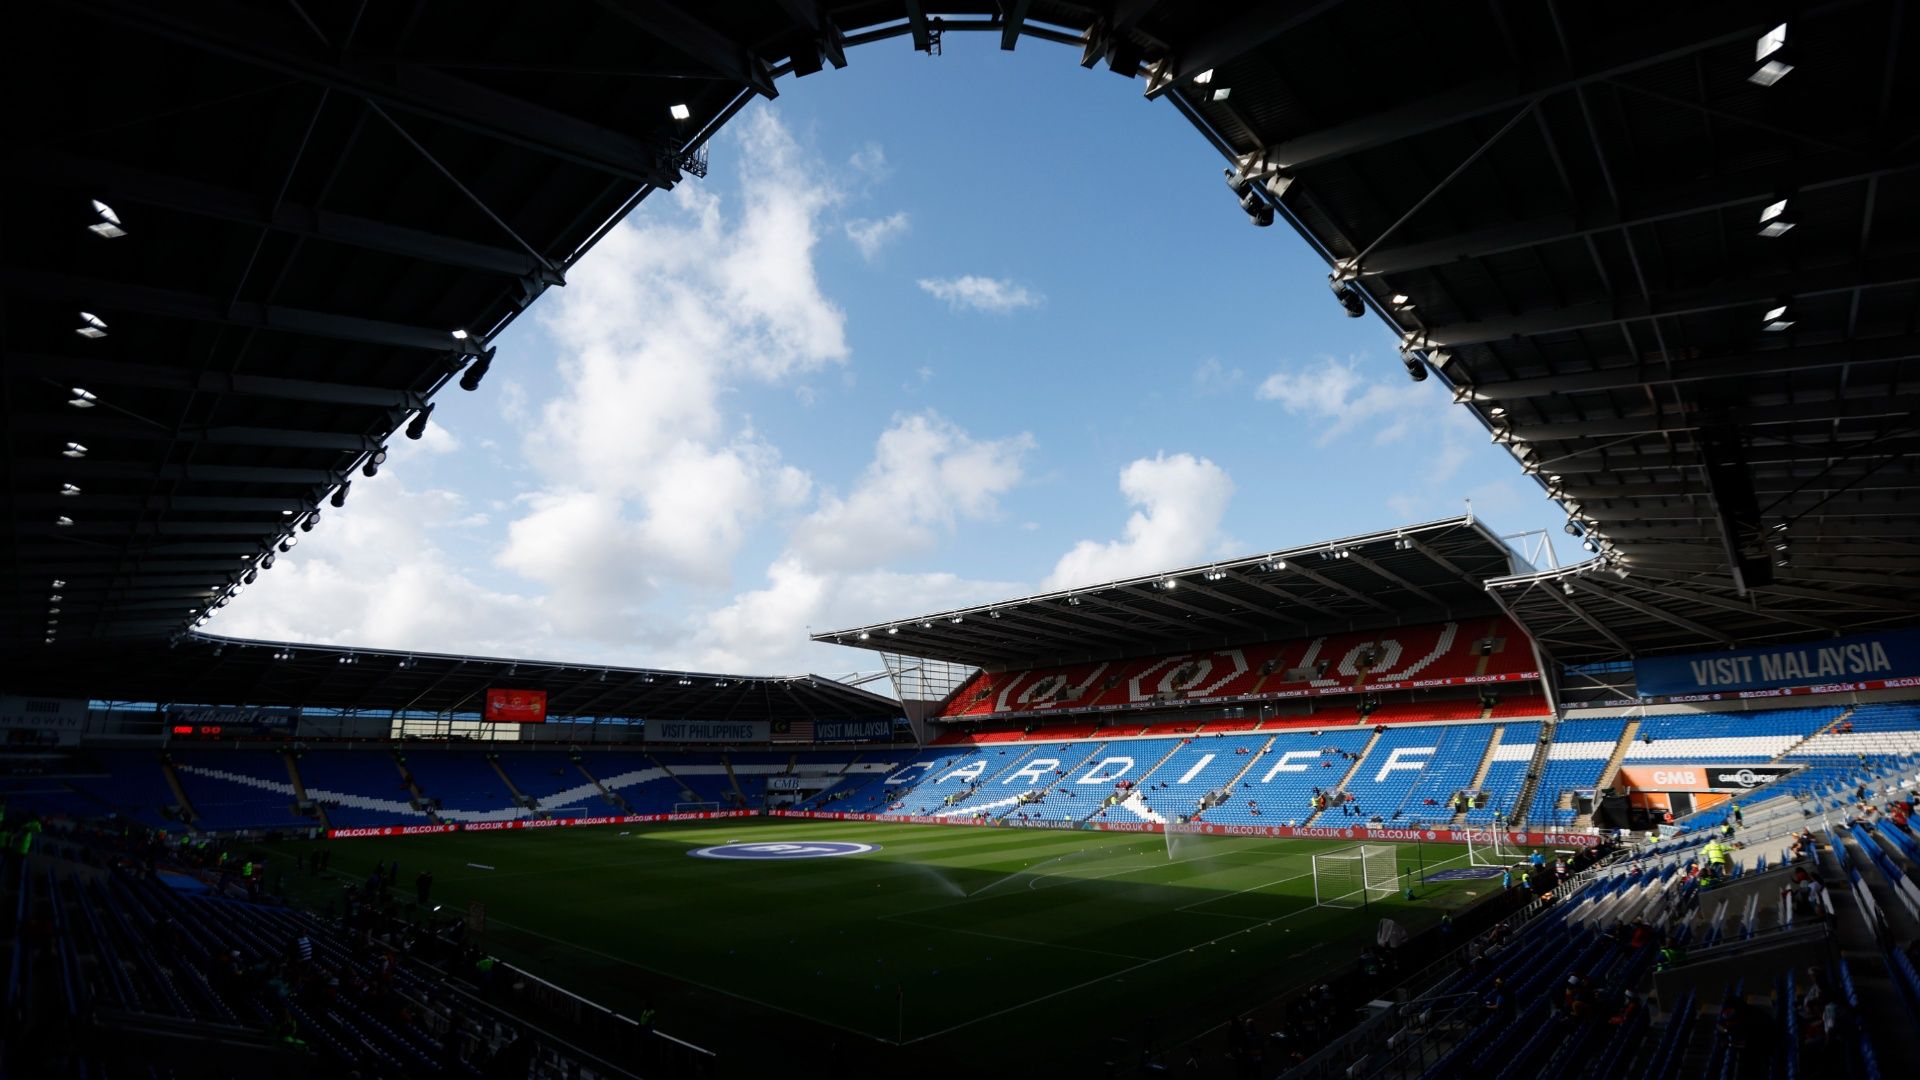 Cardiff City Academy on X: More good news for our U21 side - Lennon Peake  has joined the U21 setup for the remainder of the 2022/23 season, subject  to international clearance. The